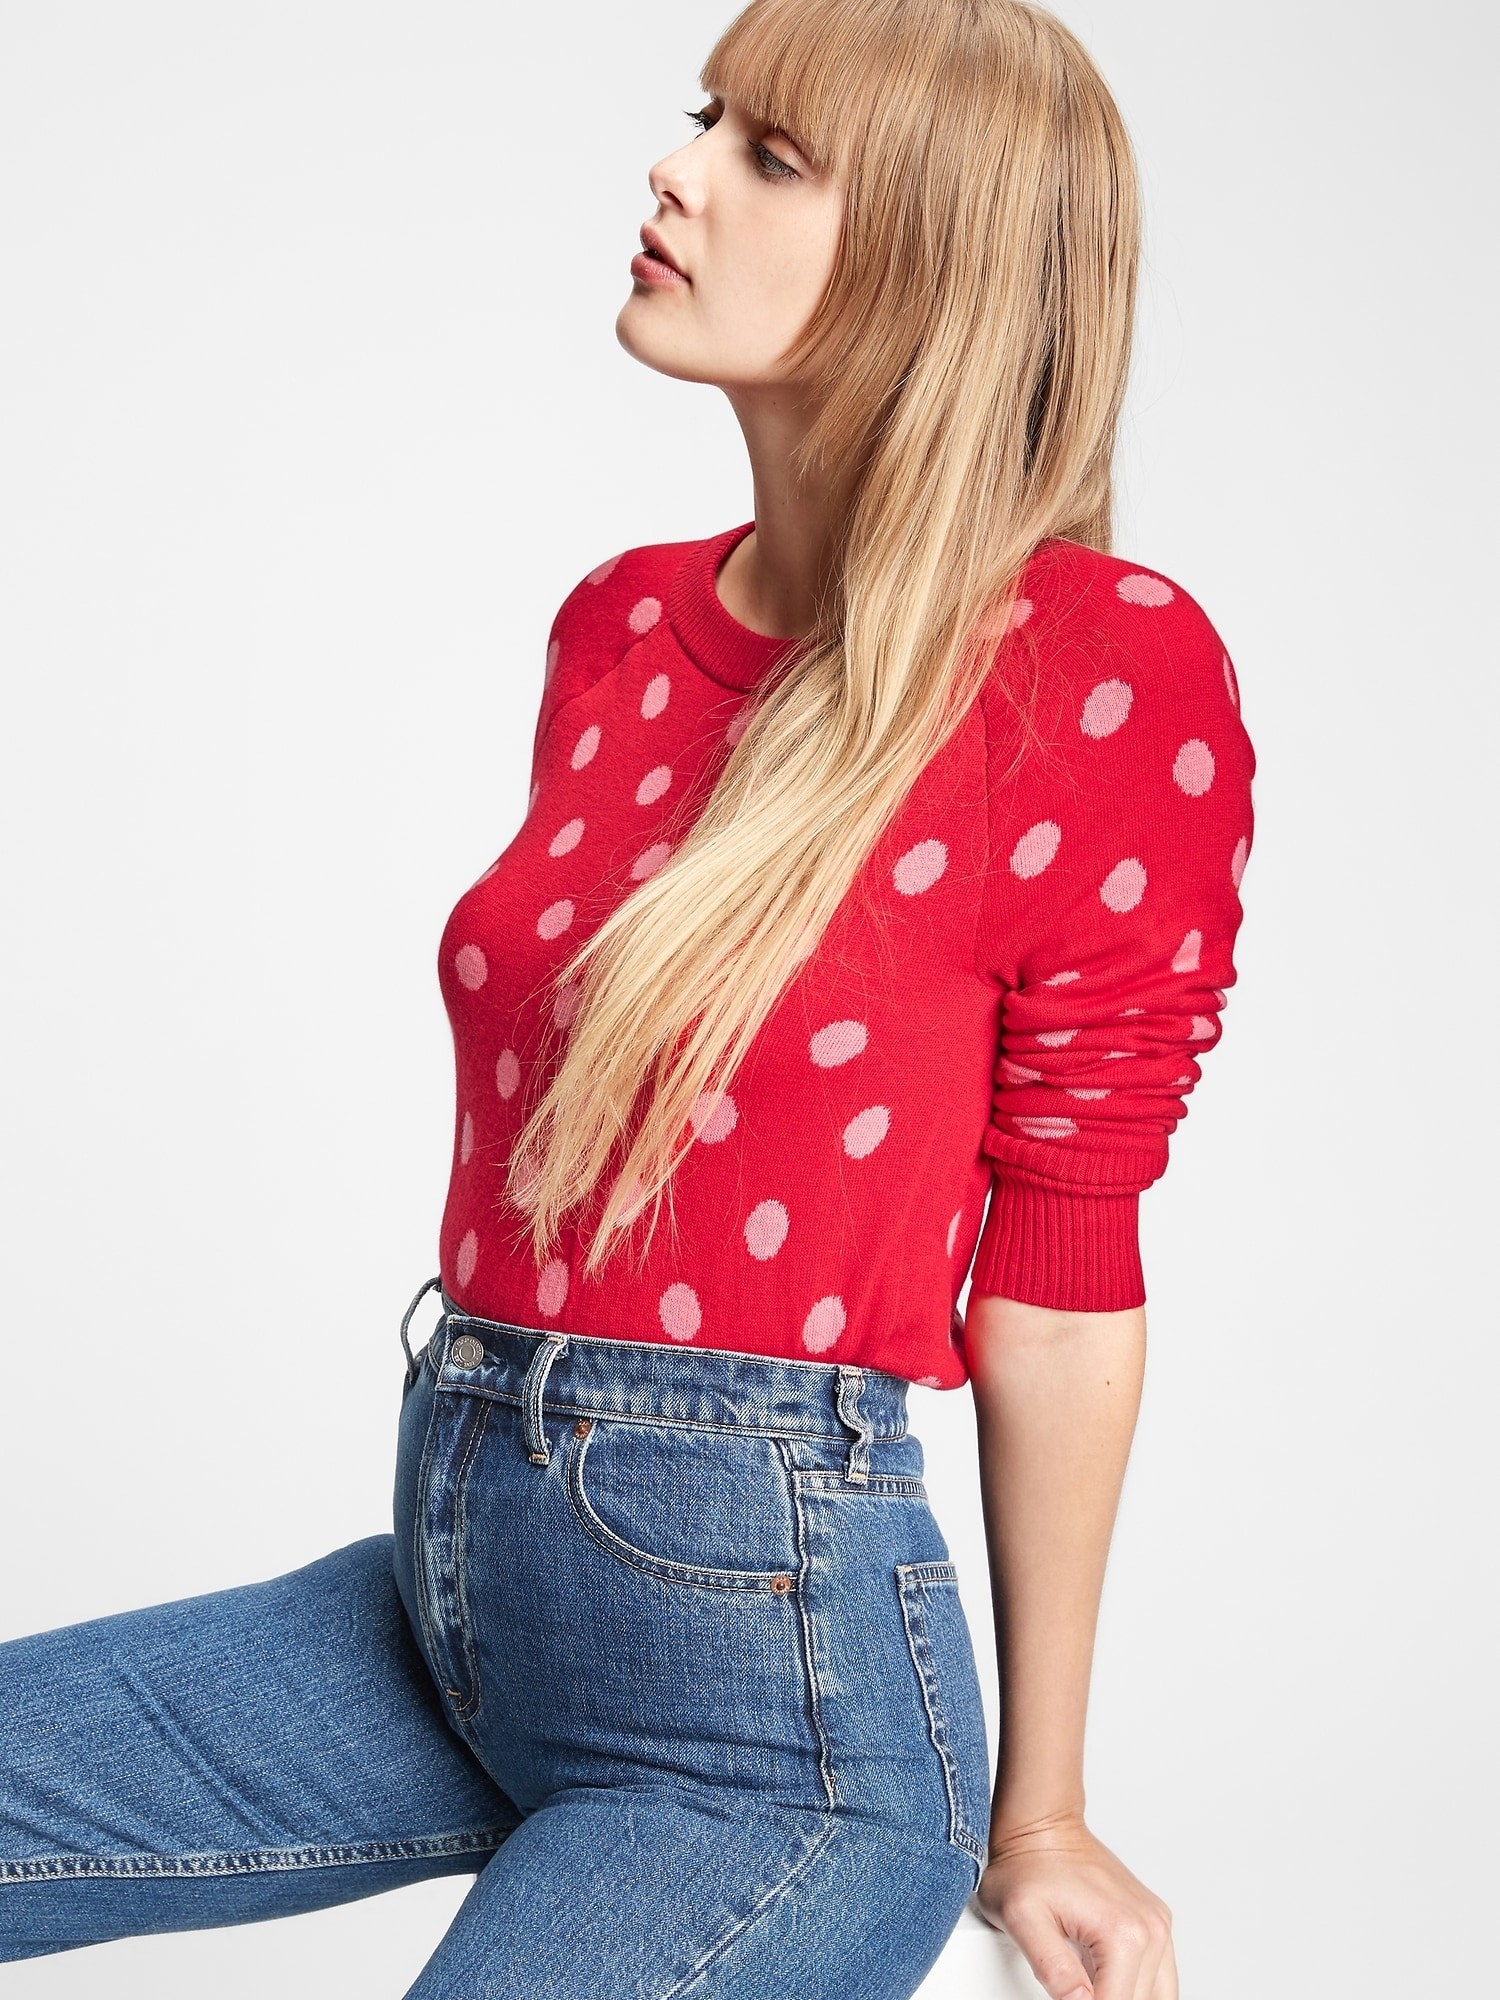 a model in a red sweater with white polka dots